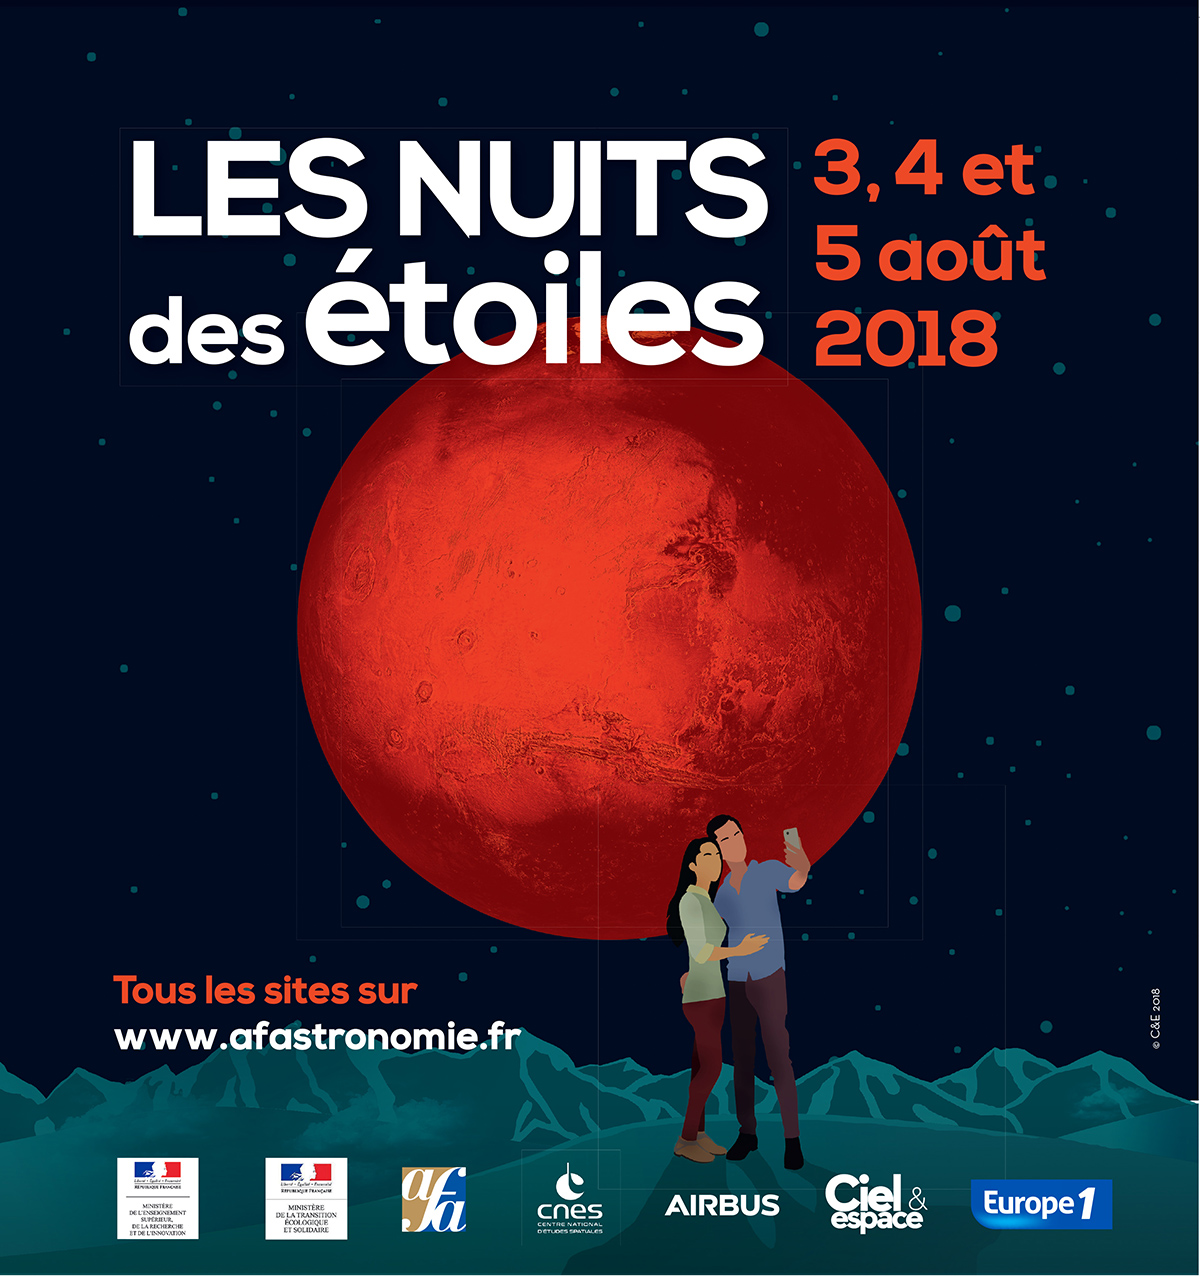 AFFICHE_NUITS_30X40.indd